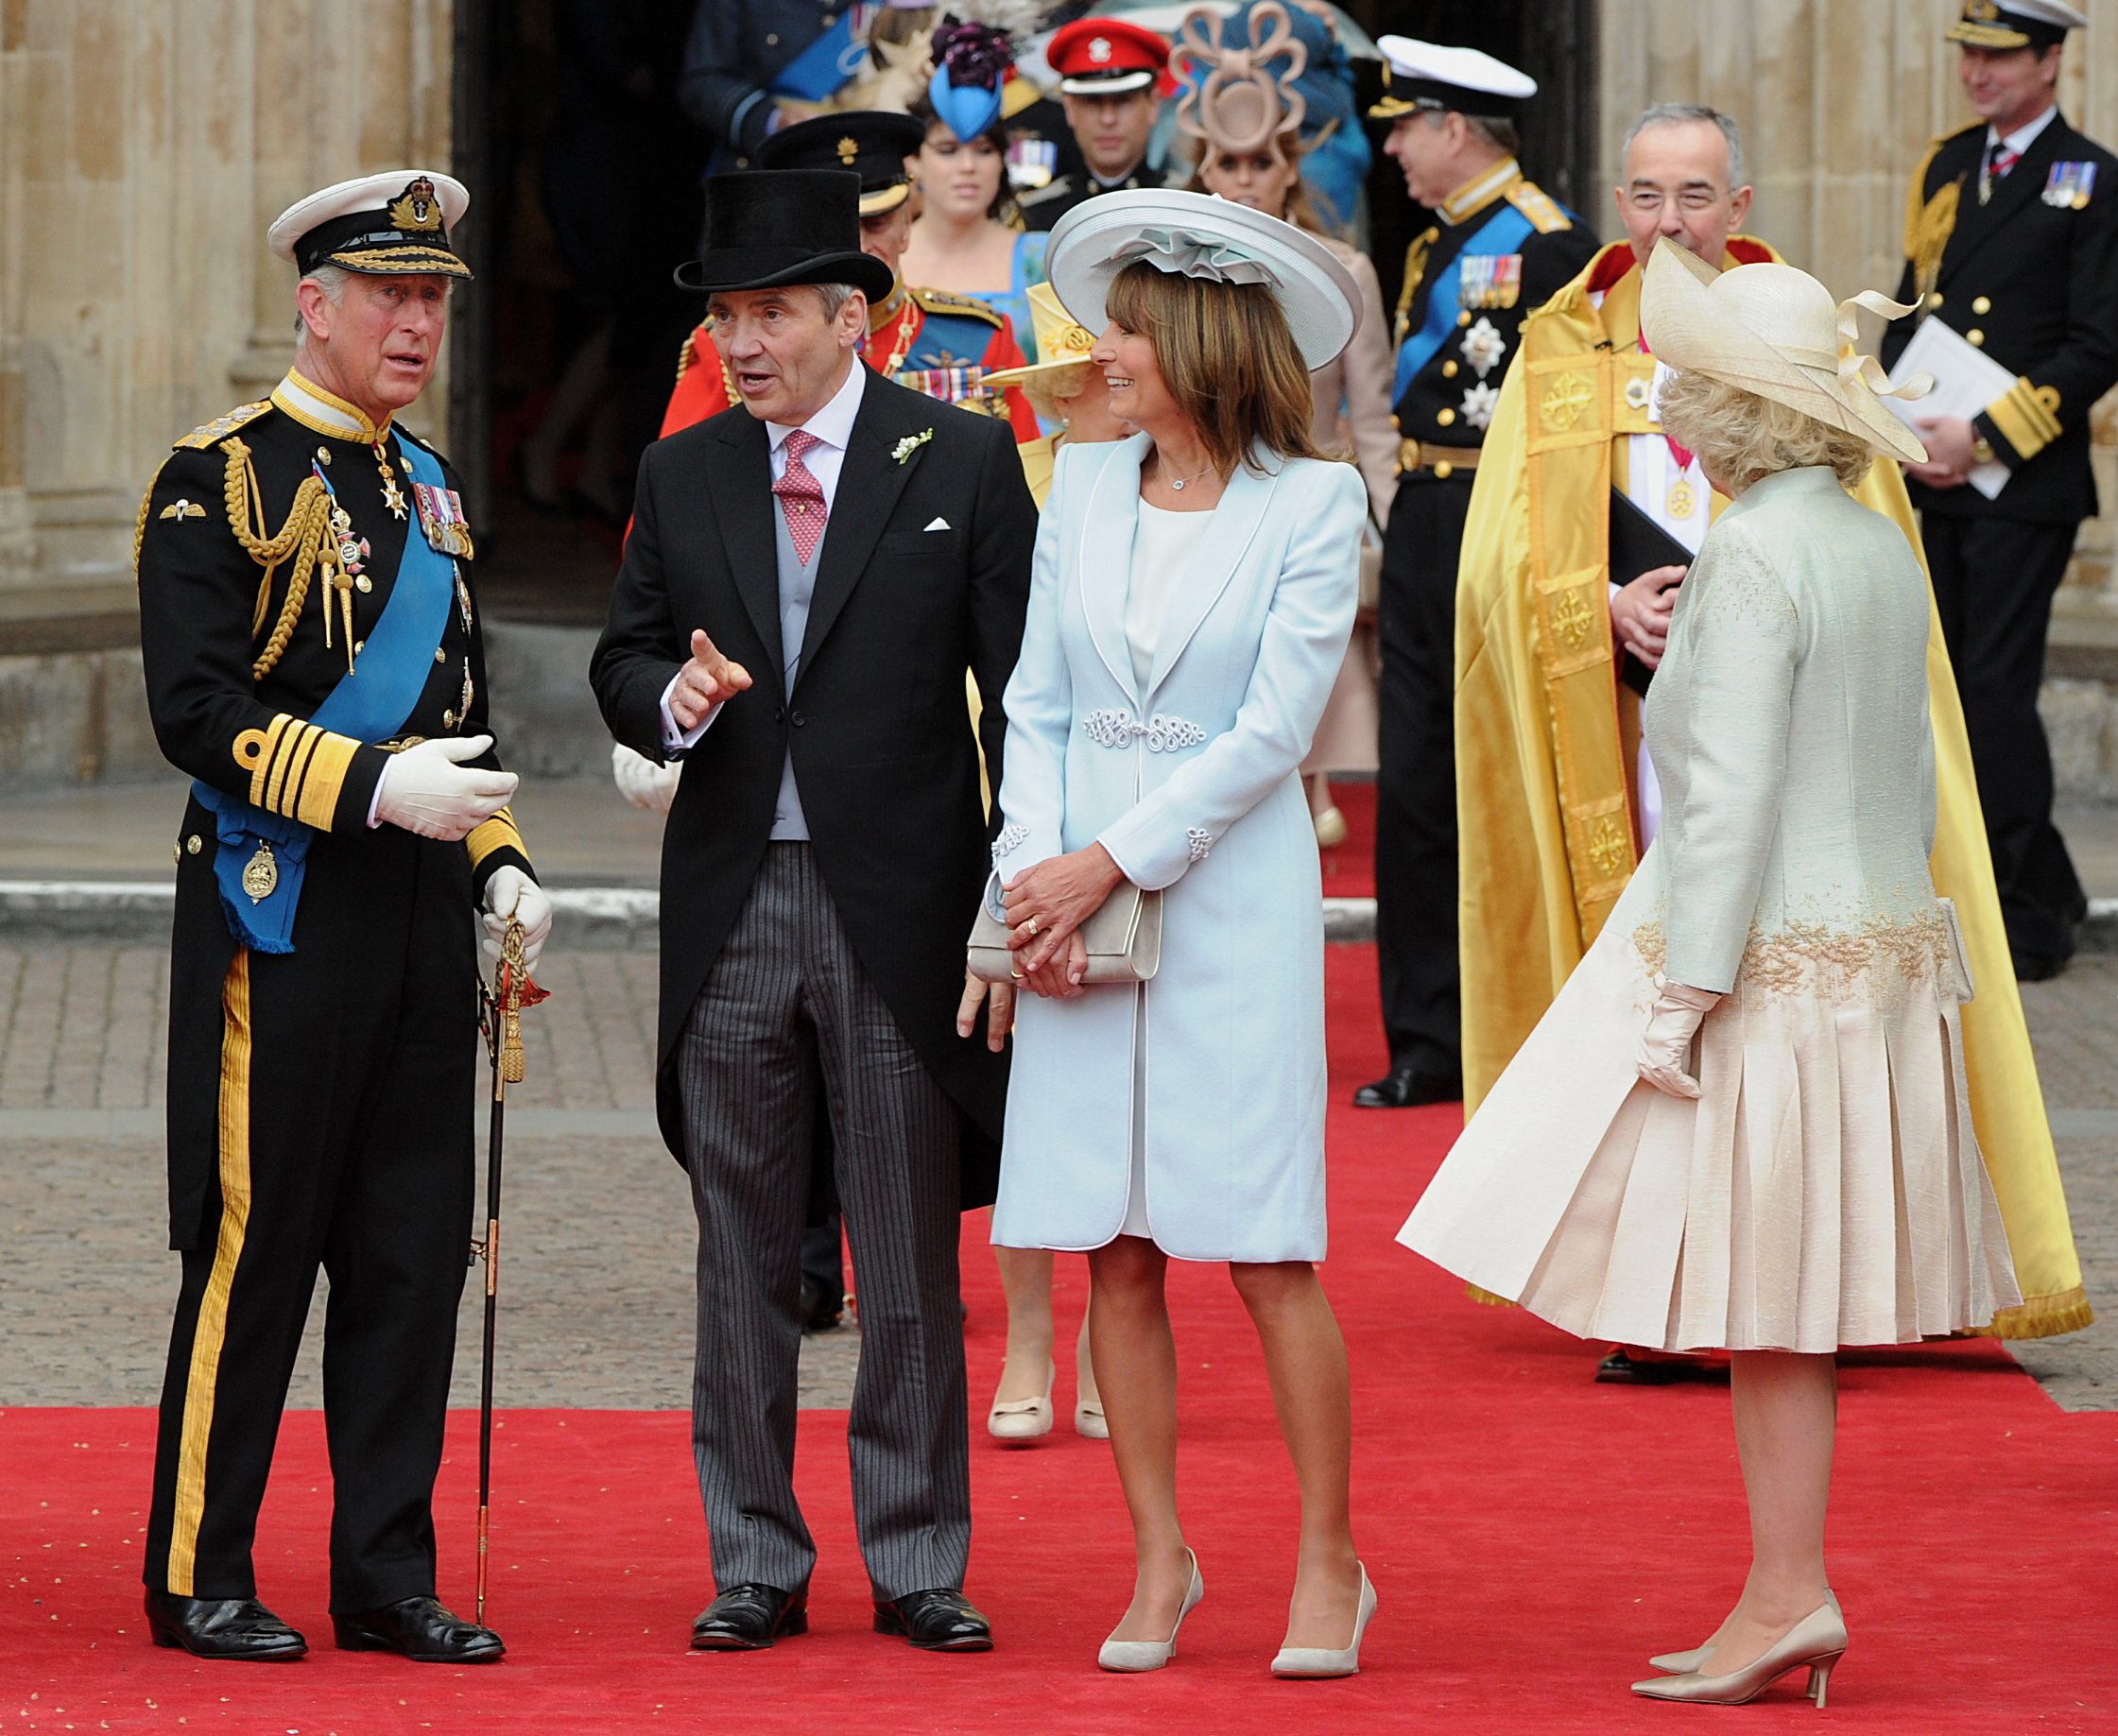 Michael and Carole Middleton chat with Prince Charles and Camilla Parker Bowles following Kate Middleton and Prince William's royal wedding.